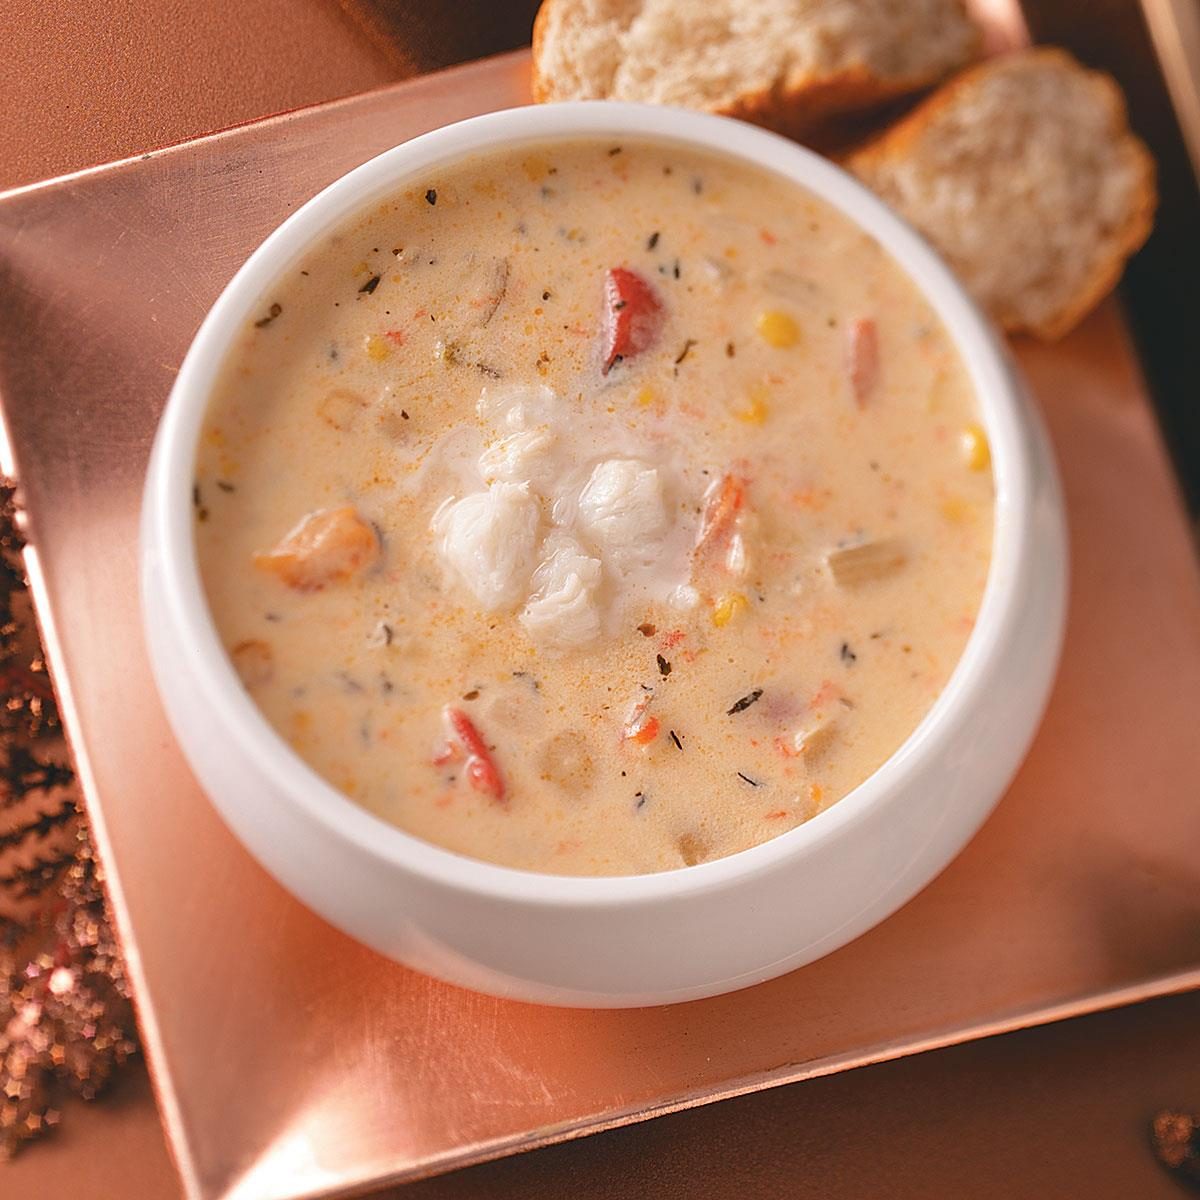 What are some good crab bisque recipes?